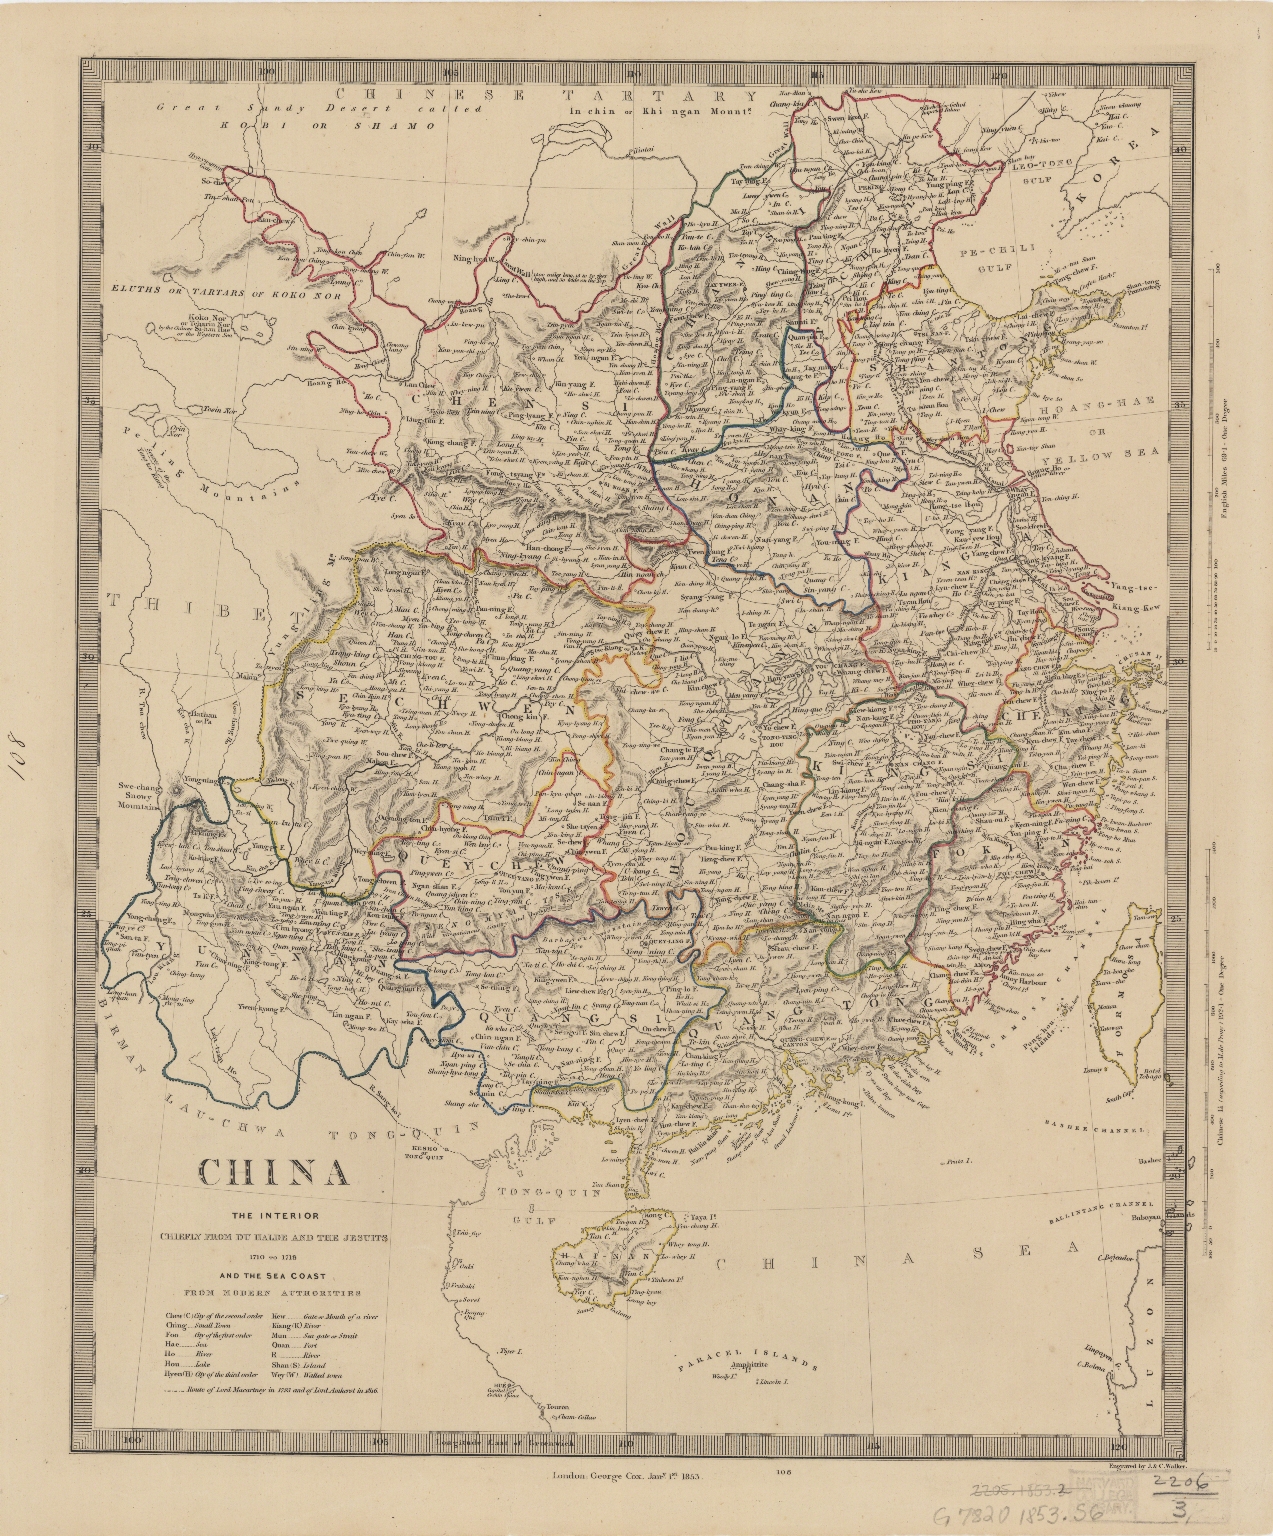 China : the interior chiefly from Du Halde and the Jesuits 1710 to 1718 and the sea coast from modern authorities